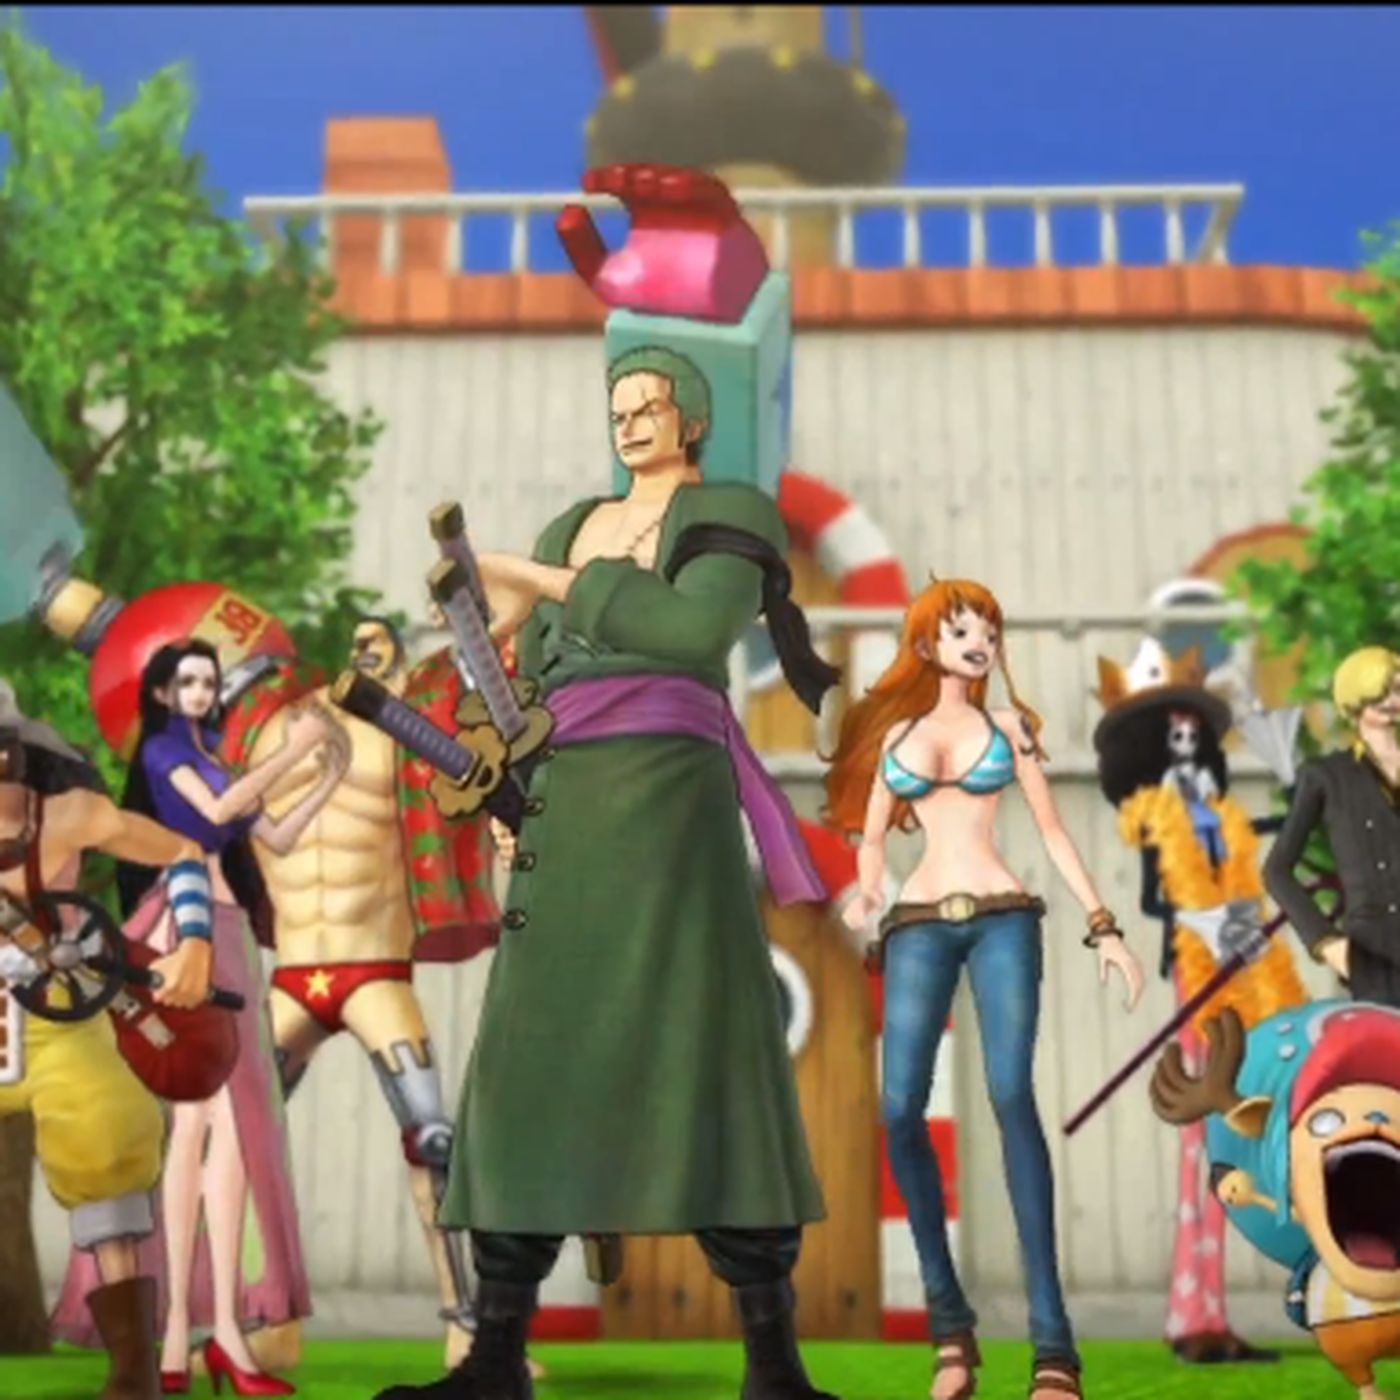 One Piece: Pirate Warriors 2 Trailer Showcases All Star Attacks